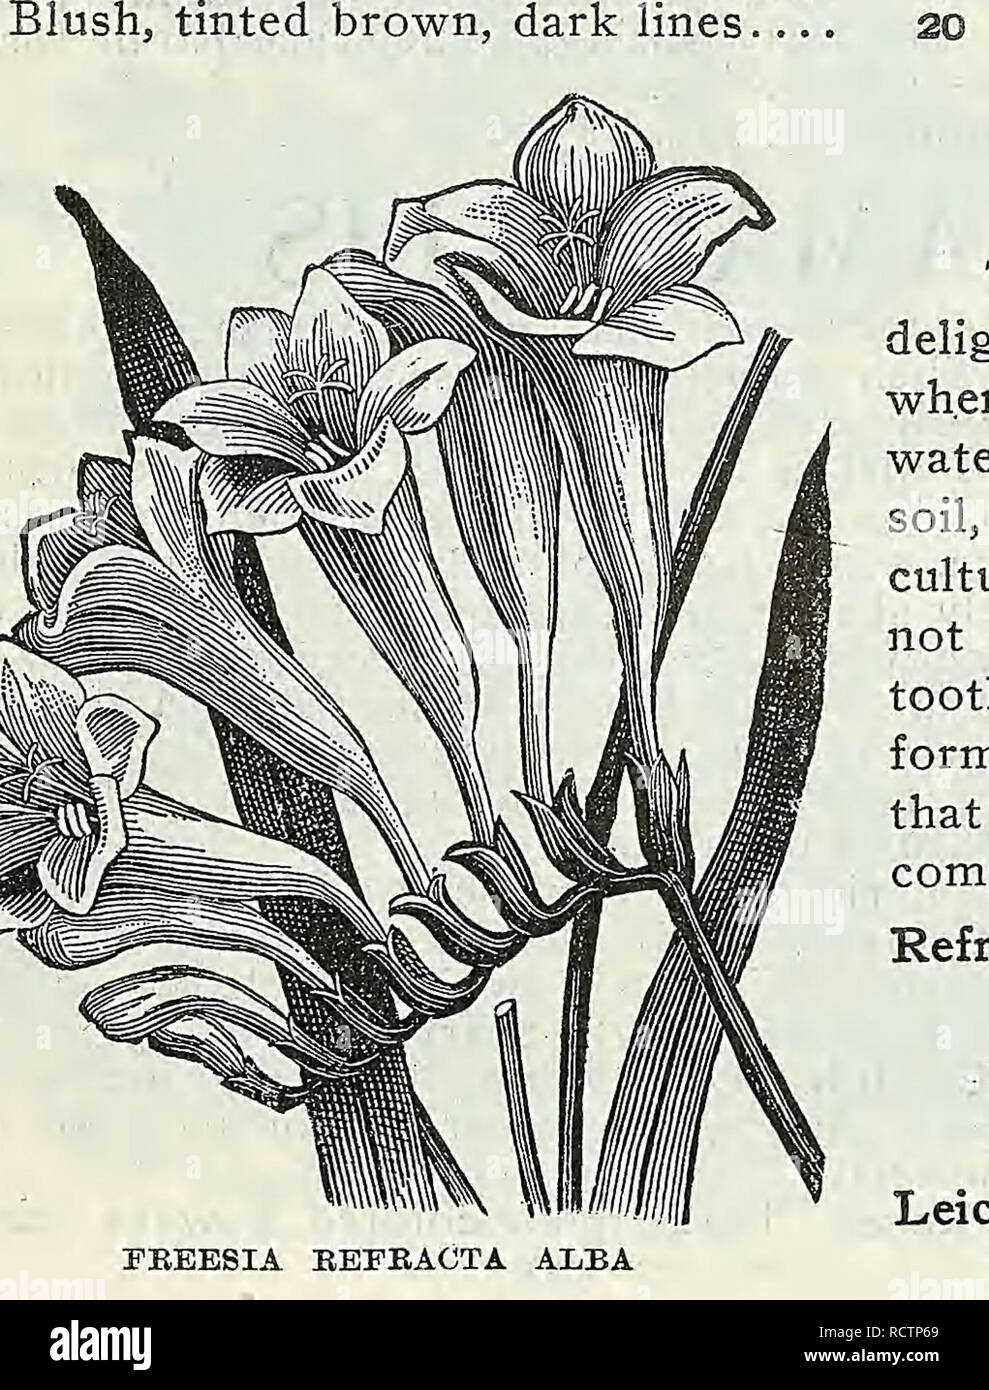 . Descriptive catalogue of vegetable, flower, and farm seeds. Nurseries (Horticulture); Nursery stock; Seeds; Bulbs (Plants); Gardening; Equipment and supplies; Bedding plants; Weeber &amp; Don. LILY OF THE VALLEY. highly also be prized forced AMAEYLLIS JOHNSONII AMARYLLIS Probably the most magnificent and gorgeous bulbous plant known. Their immense flowers, richness of coloring and regal habit are simply incomparable. They throw up spikes, from 18 inches to 3 feet high, bearing enormous trumpet-shaped flowers, averaging 6 to 10 inches across, of great substance, some being of rich and glowing Stock Photo